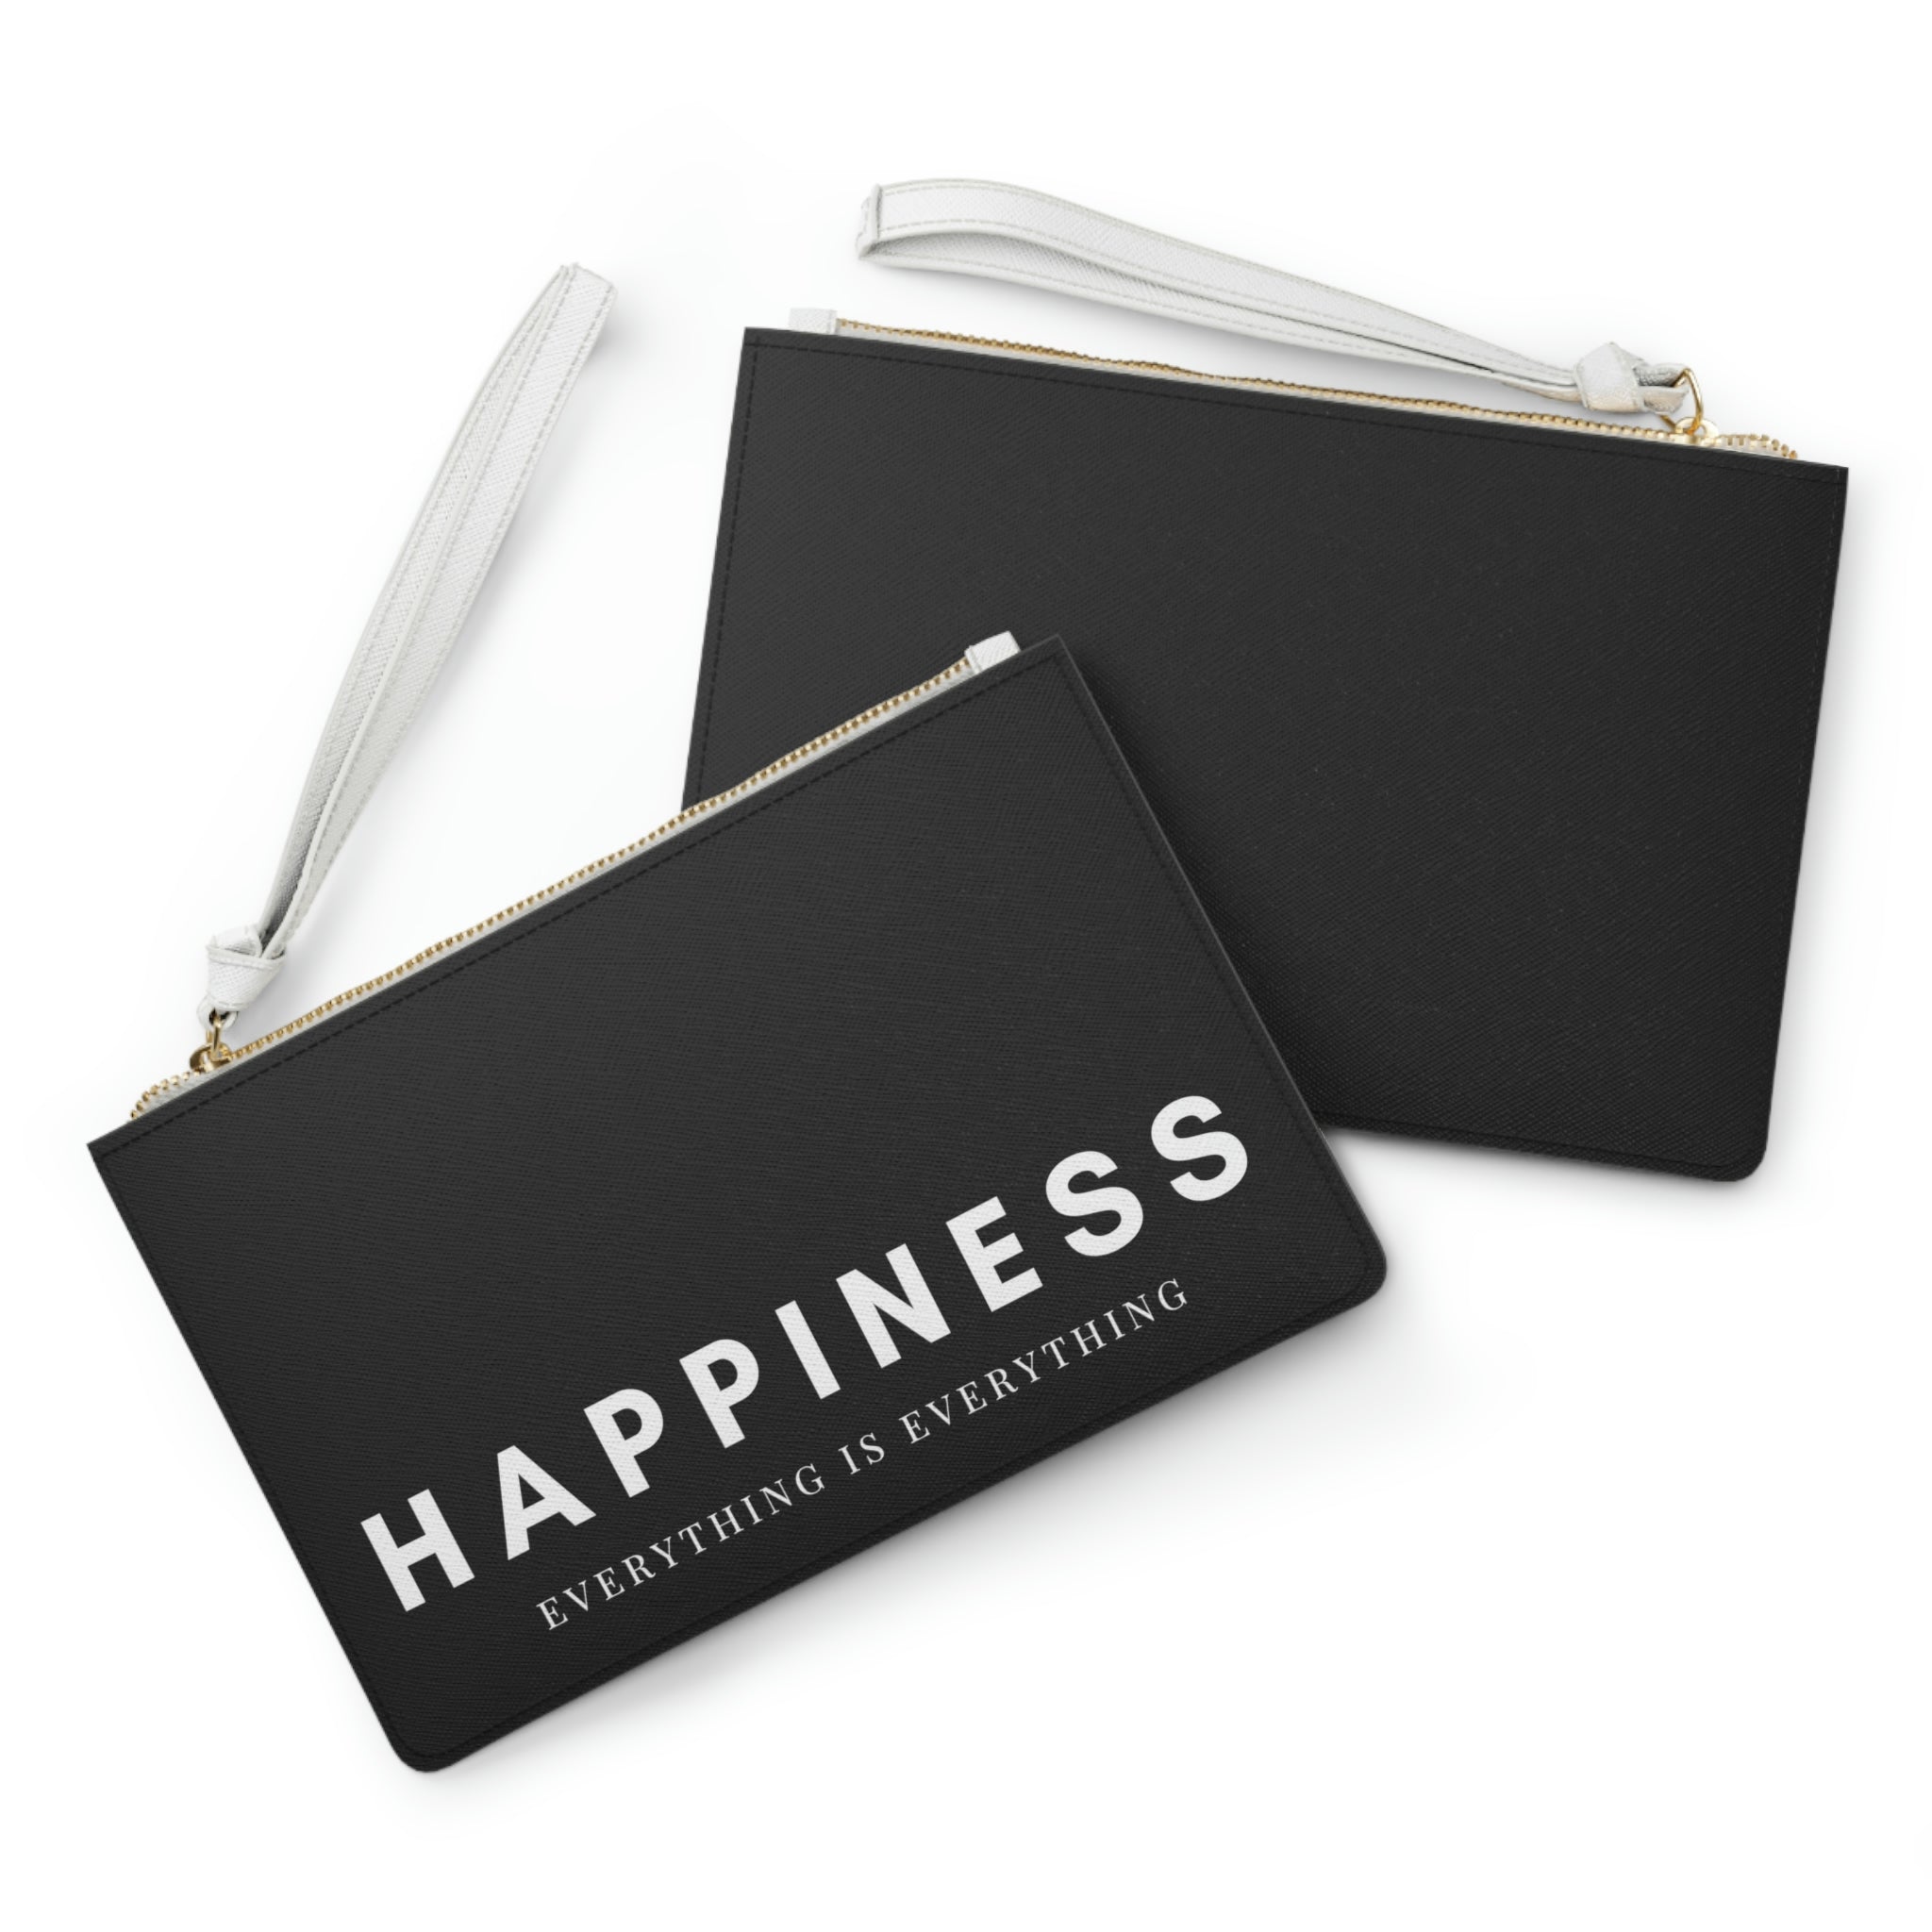 Everything Is Everything Vegan Leather Clutch Bag